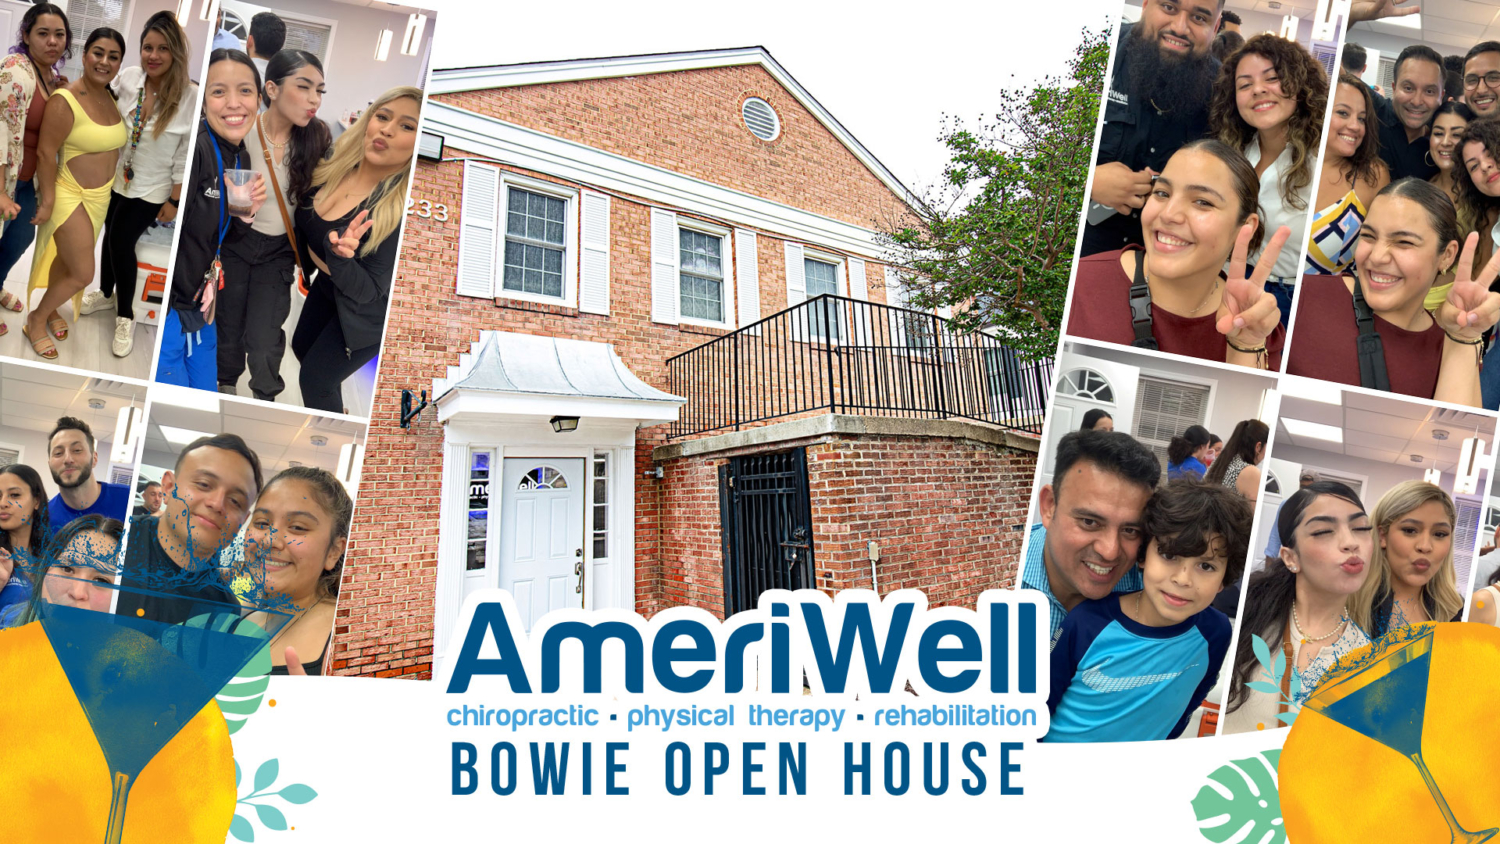 AmeriWell's Newest Clinic in Bowie, Maryland: A Memorable Open House Event